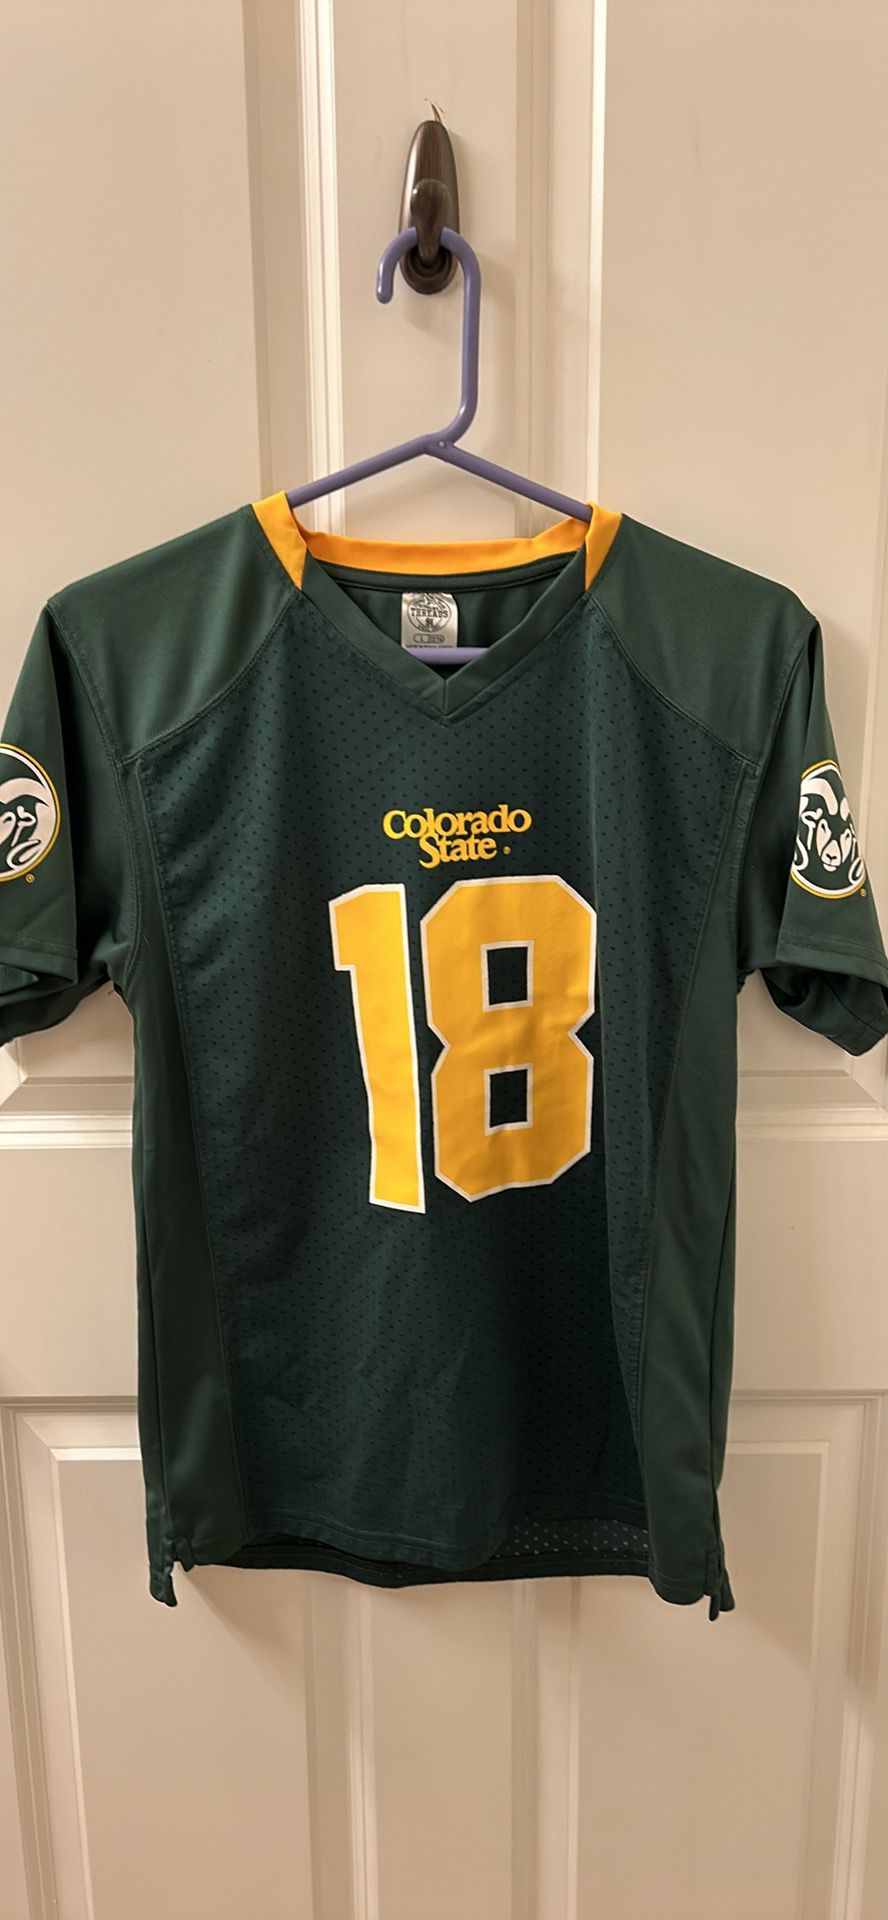 Colorado State Rams #18 CSU Football Jersey Kids Large 12/14 Fits Small Adult